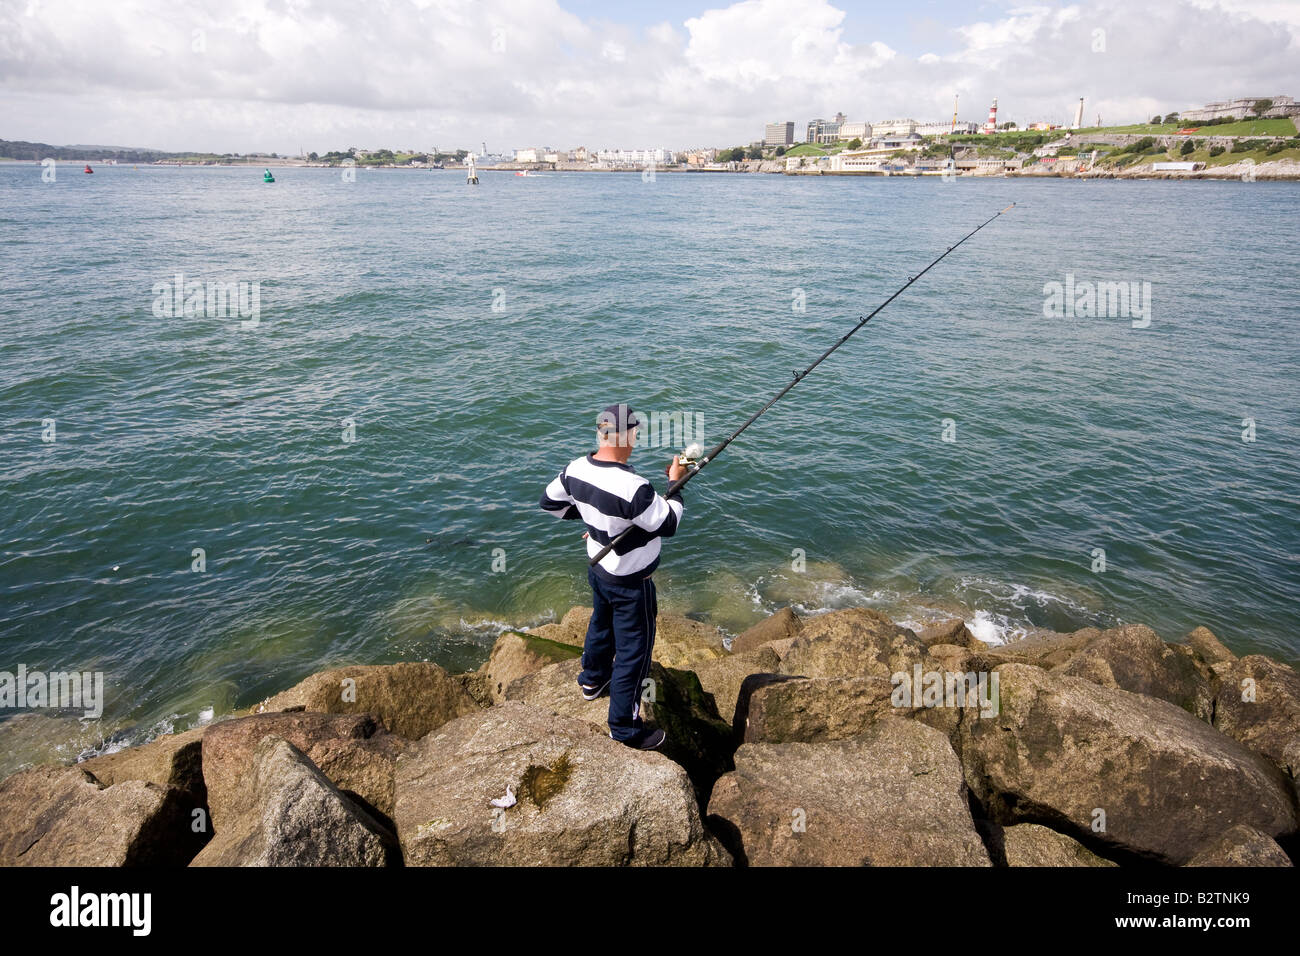 A sea angler fishes from the rocks at the west end of Mountbatten Pier Stock Photo